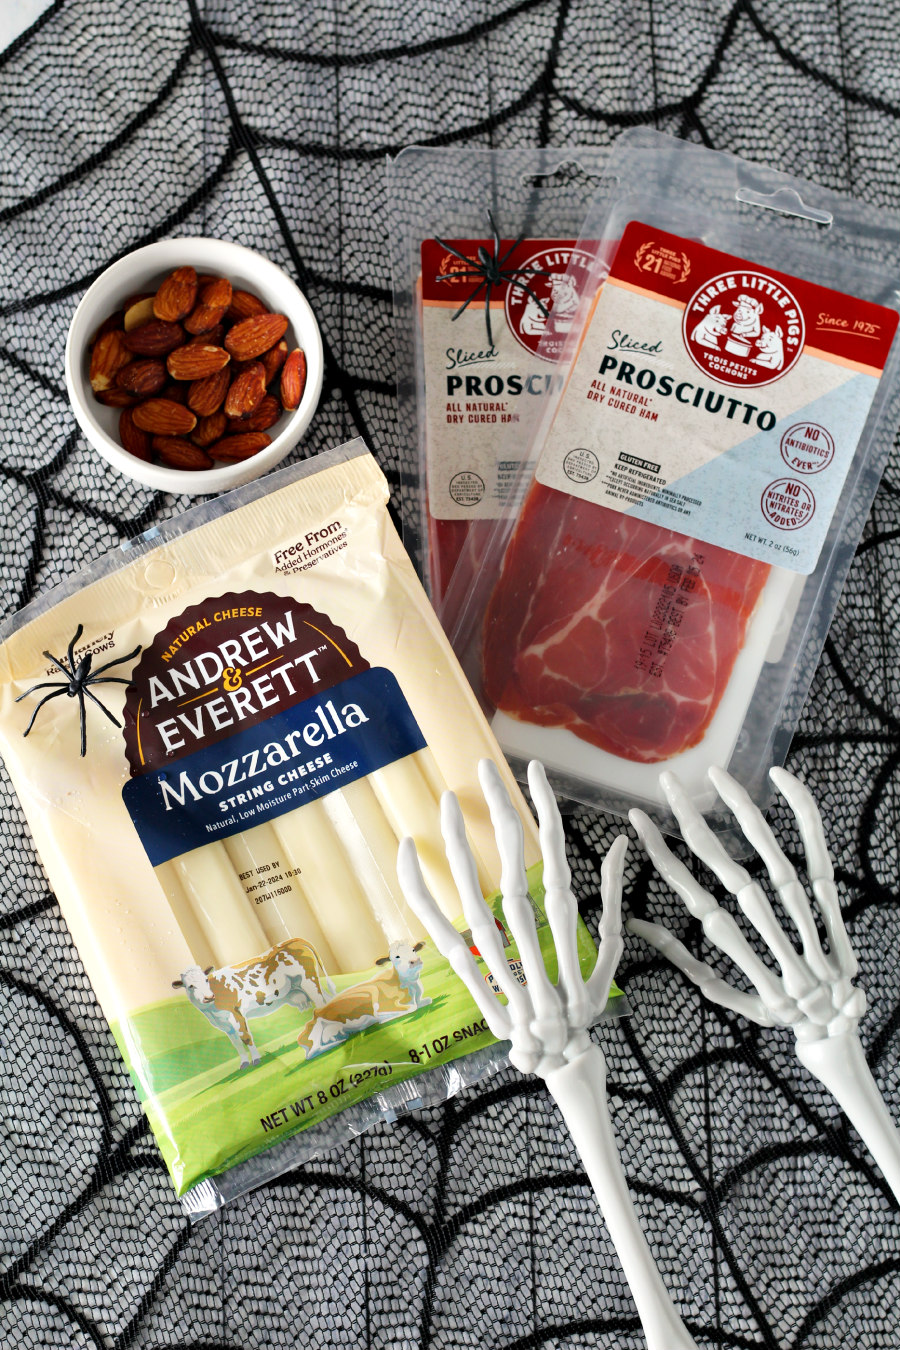 Ingredients from Hungryroot including almonds, mozzarella string cheese, and sliced prosciutto.